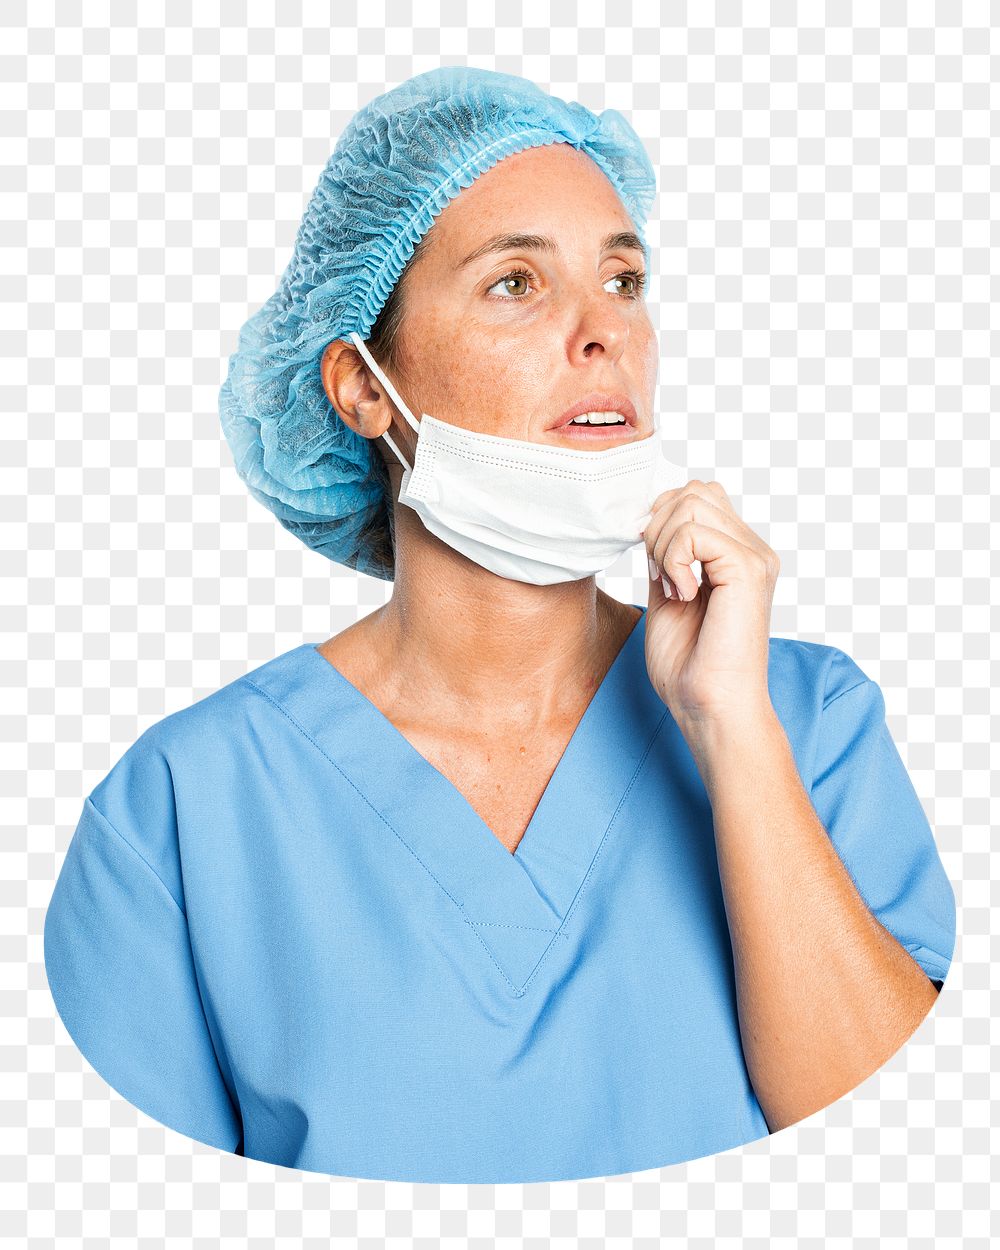 Female surgeon png blue gown, transparent background